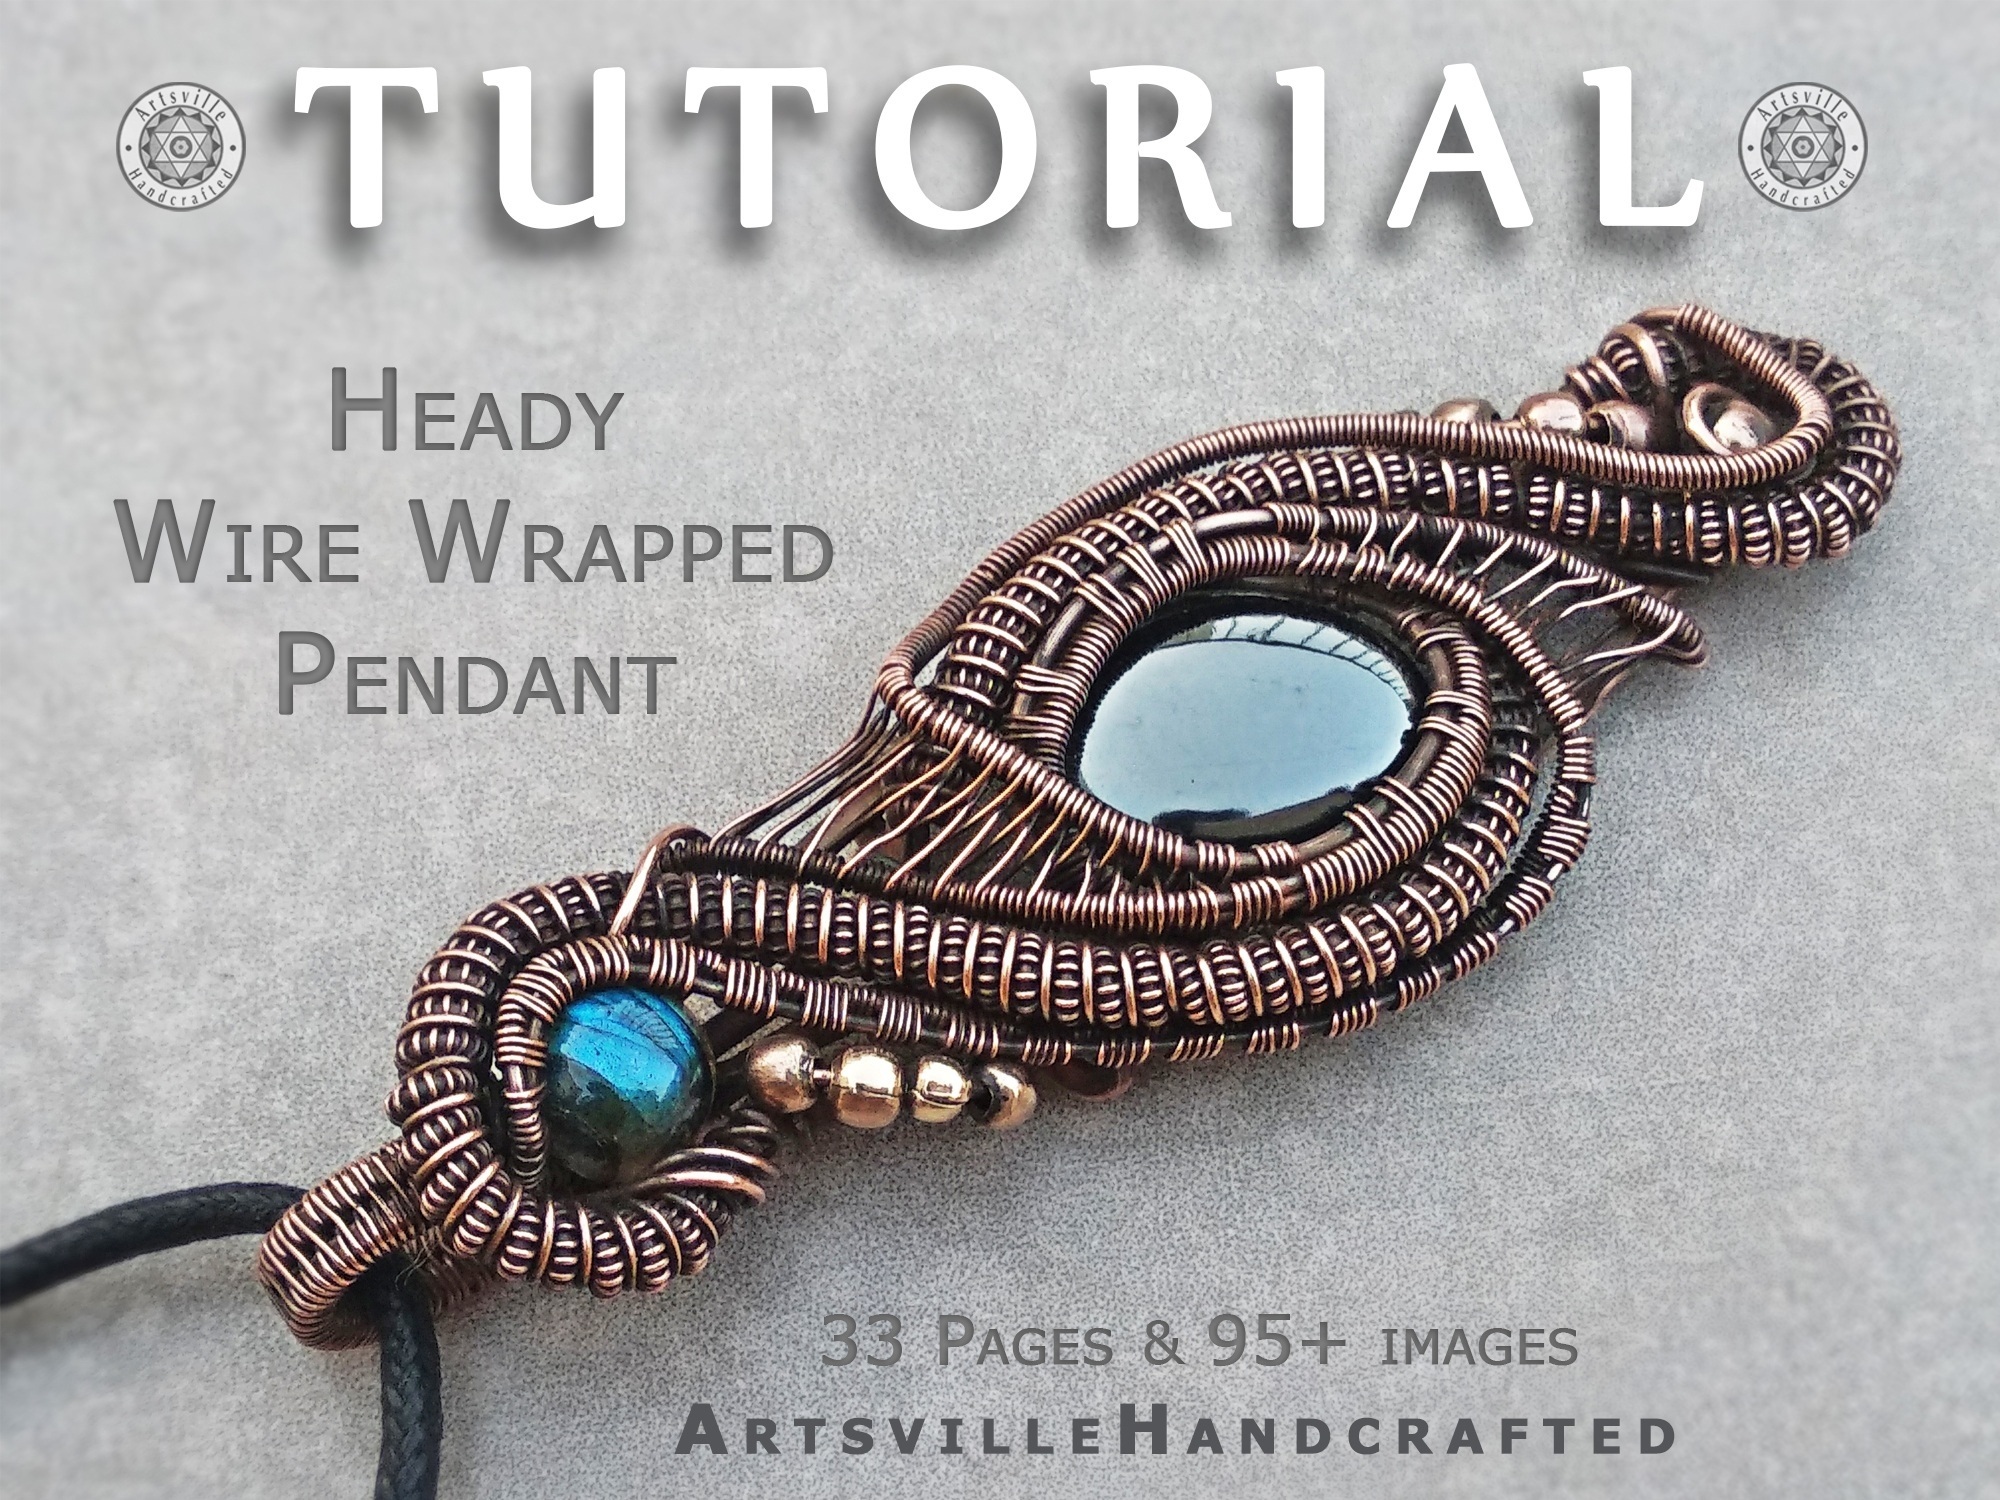 Wire-Wrapping Tutorial DIY Jewelry Kits on   Wire wrapping crystals,  Wire wrapping techniques, Wire wrapping tutorial